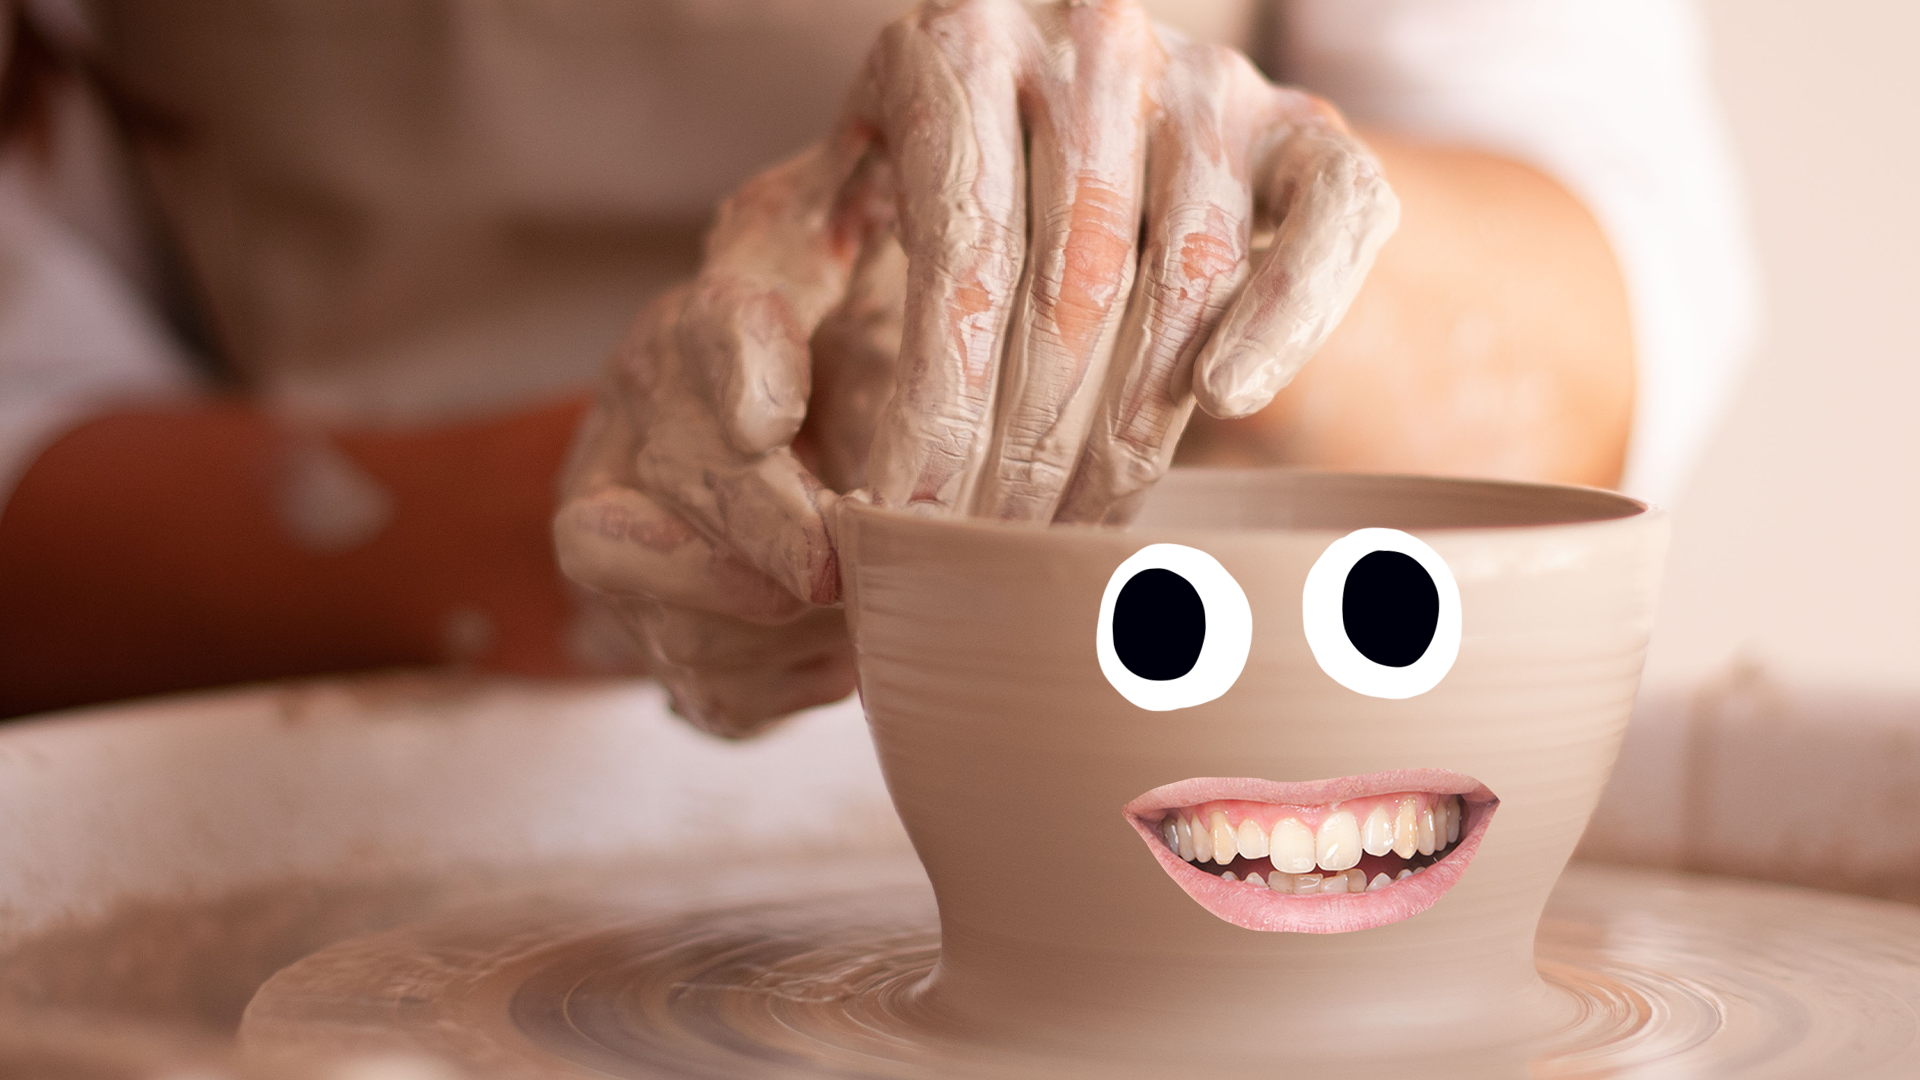 Someone making a pot with a goofy face